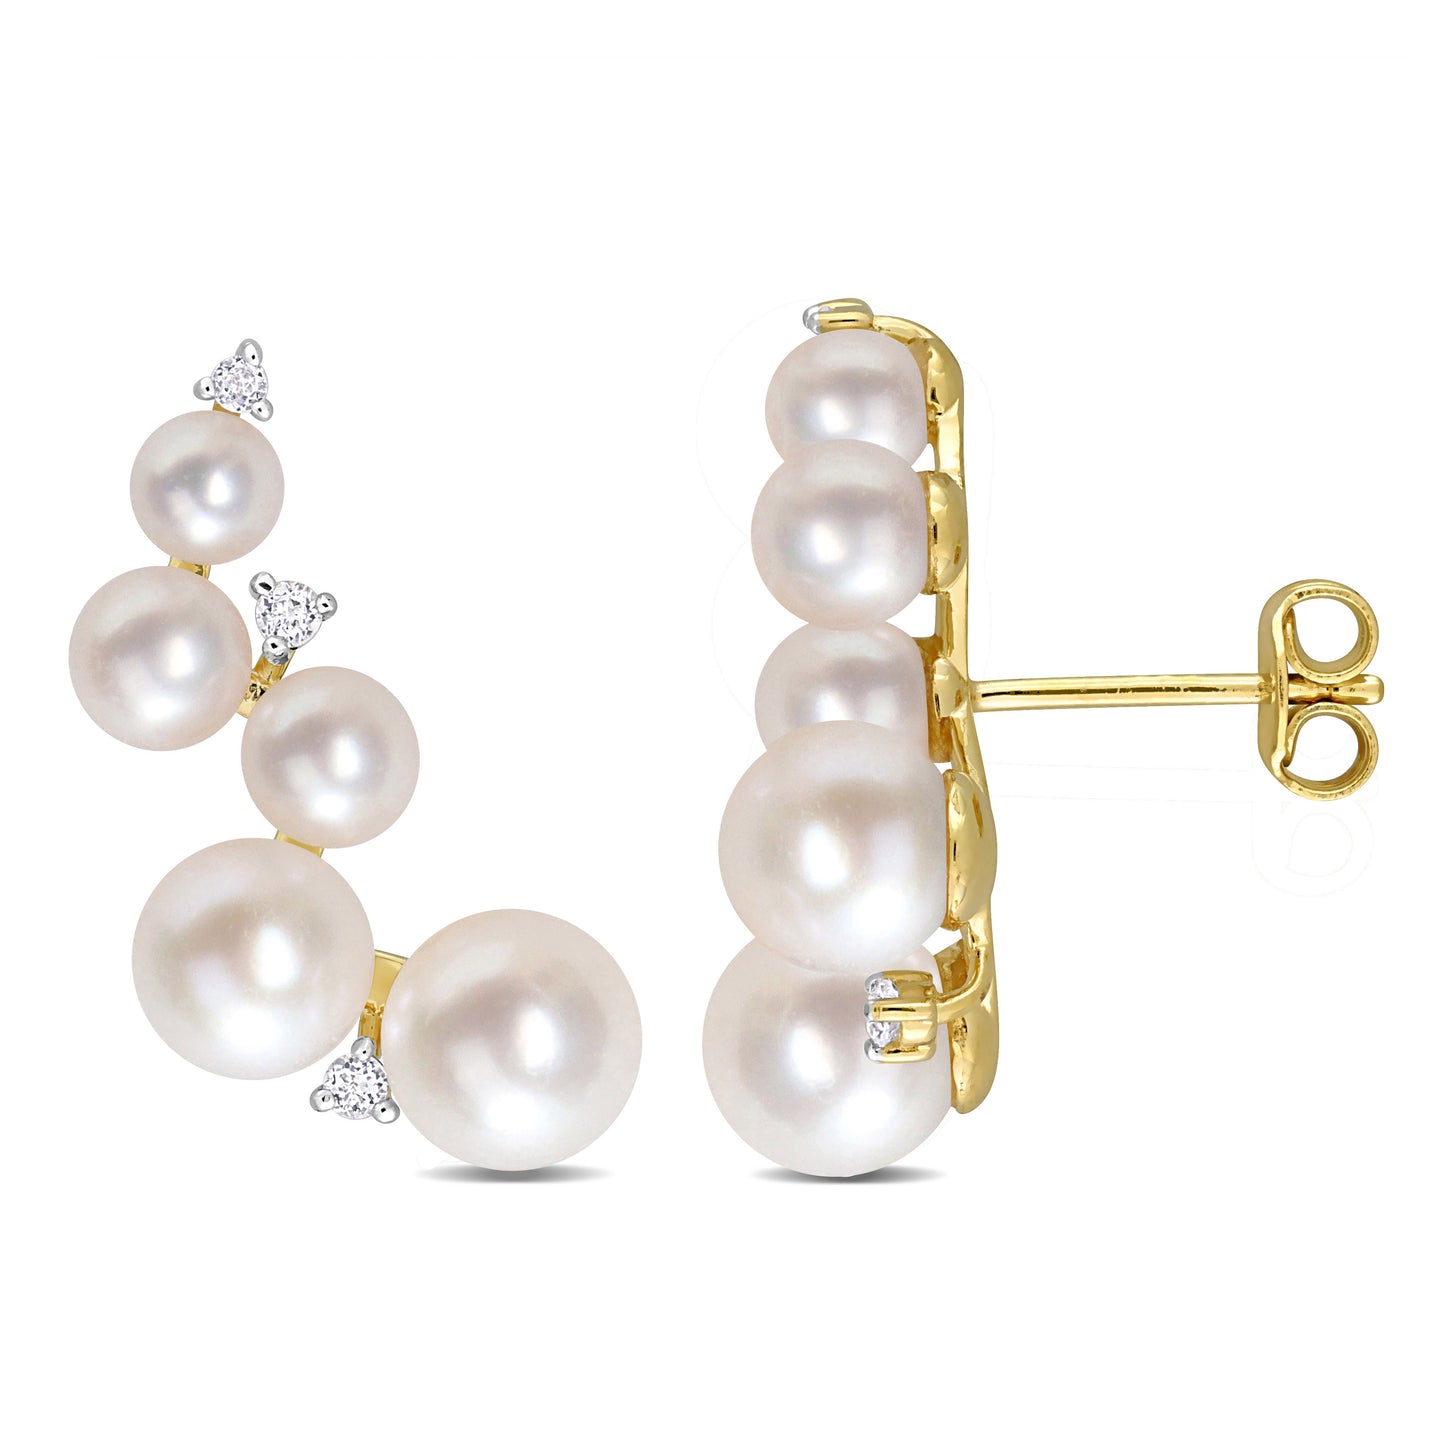 Pearls & White Topaz Cluster Earrings in Yellow Silver